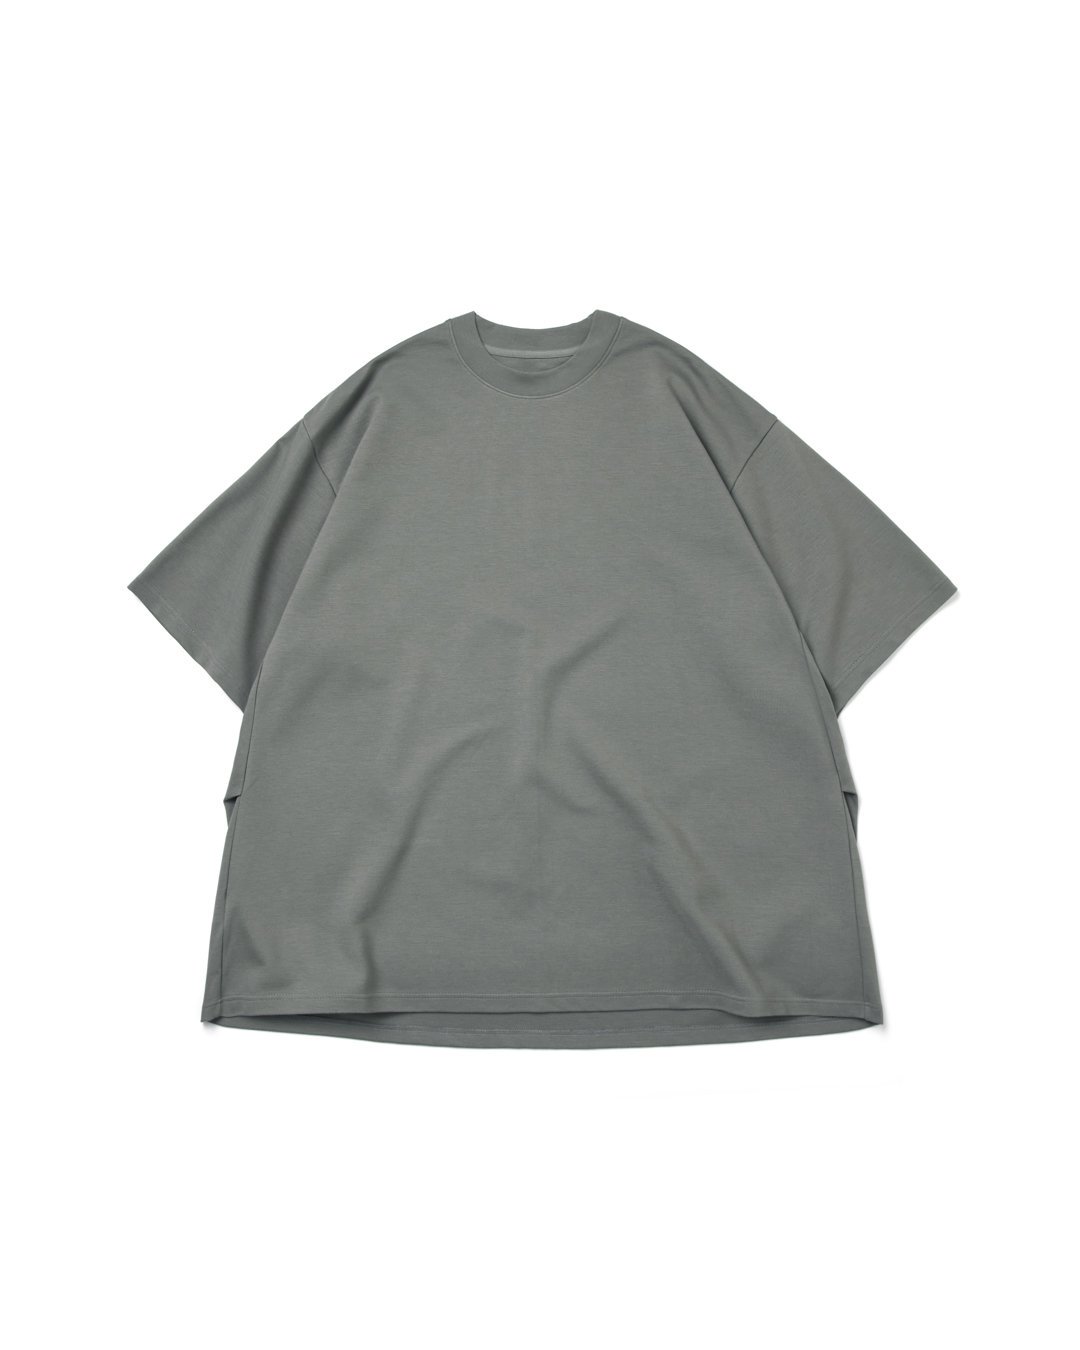 M_MODEL-01 JUST A NORMAL TEE - Gray